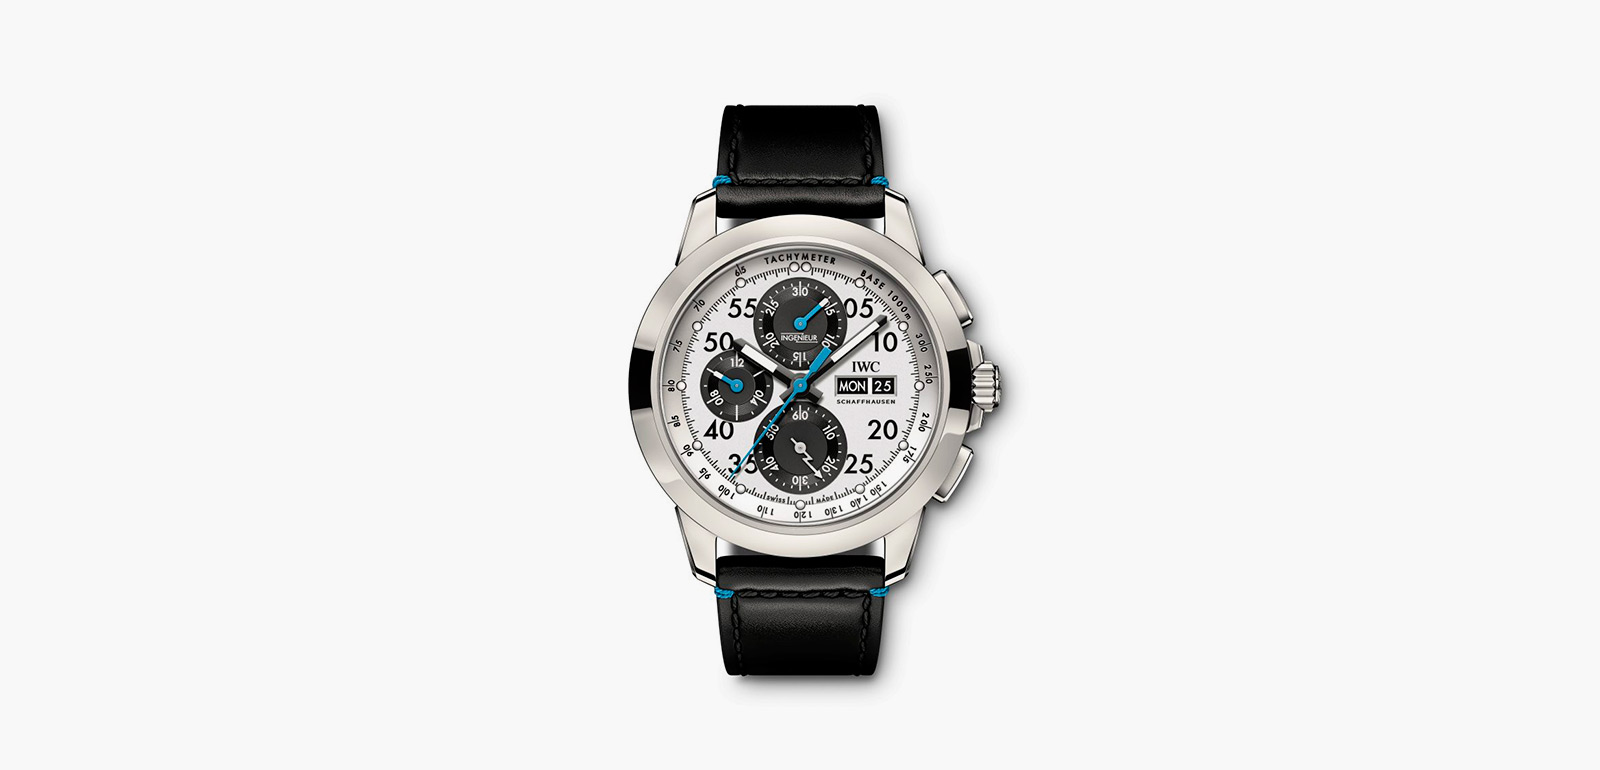 IWC Ingenieur Goodwood Members’ Meeting Special Edition